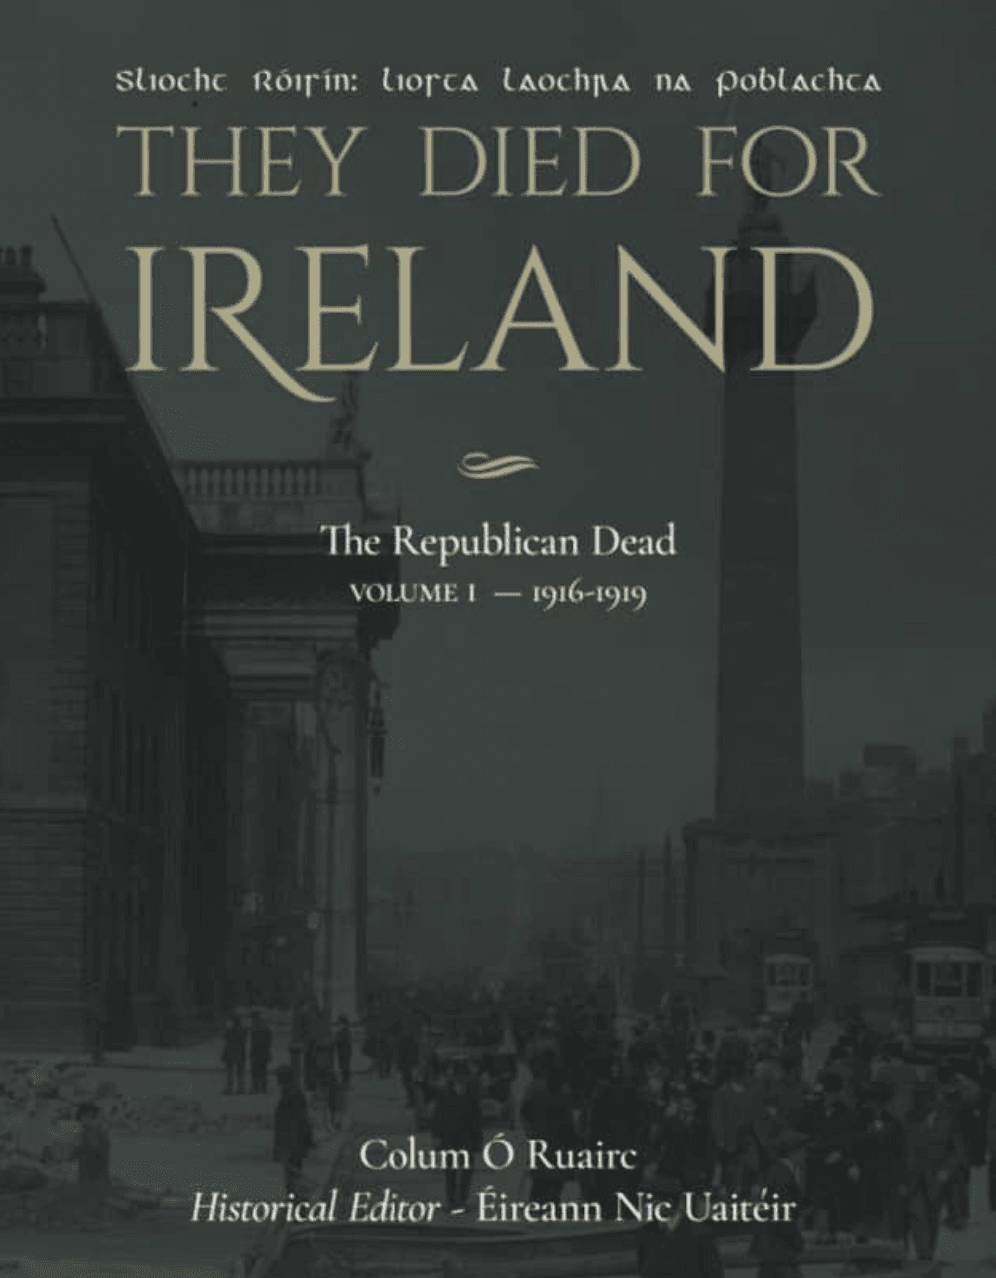 VOLUNTEERS: The books will tell the story of the Irish Revolution and all Republican Volunteers who died